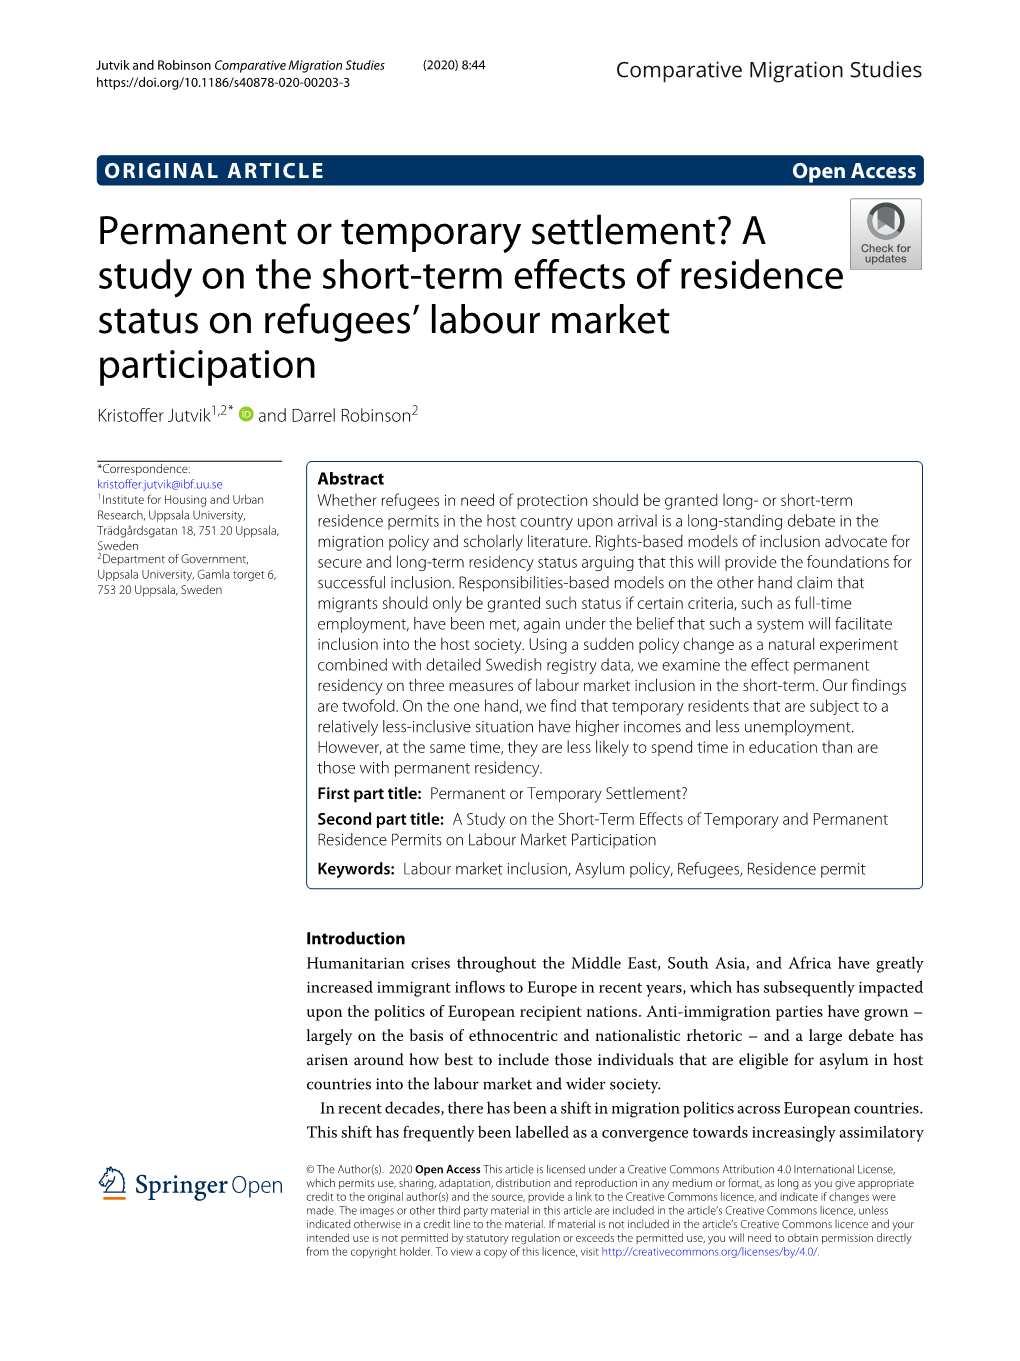 Permanent Or Temporary Settlement? a Study on the Short-Term Effects of Residence Status on Refugees’ Labour Market Participation